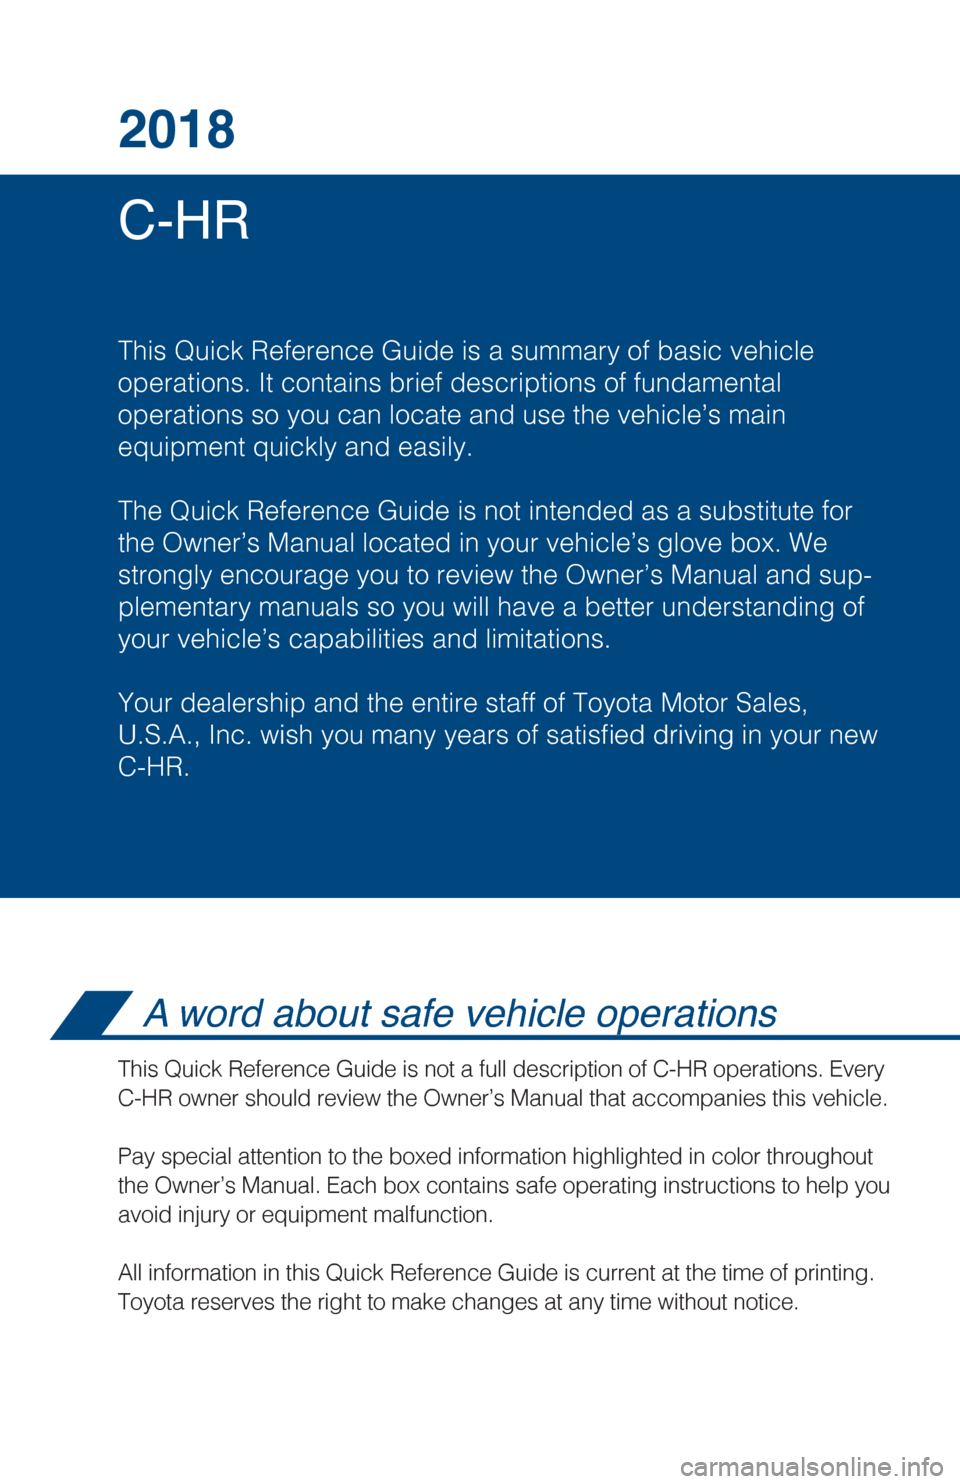 TOYOTA C-HR 2018 1.G Quick Reference Guide C-HR 2018
This Quick Reference Guide is a summary of basic vehicle
operations. It contains brief descriptions of fundamental
operations so you can locate and use the vehicle’s main 
equipment quickl